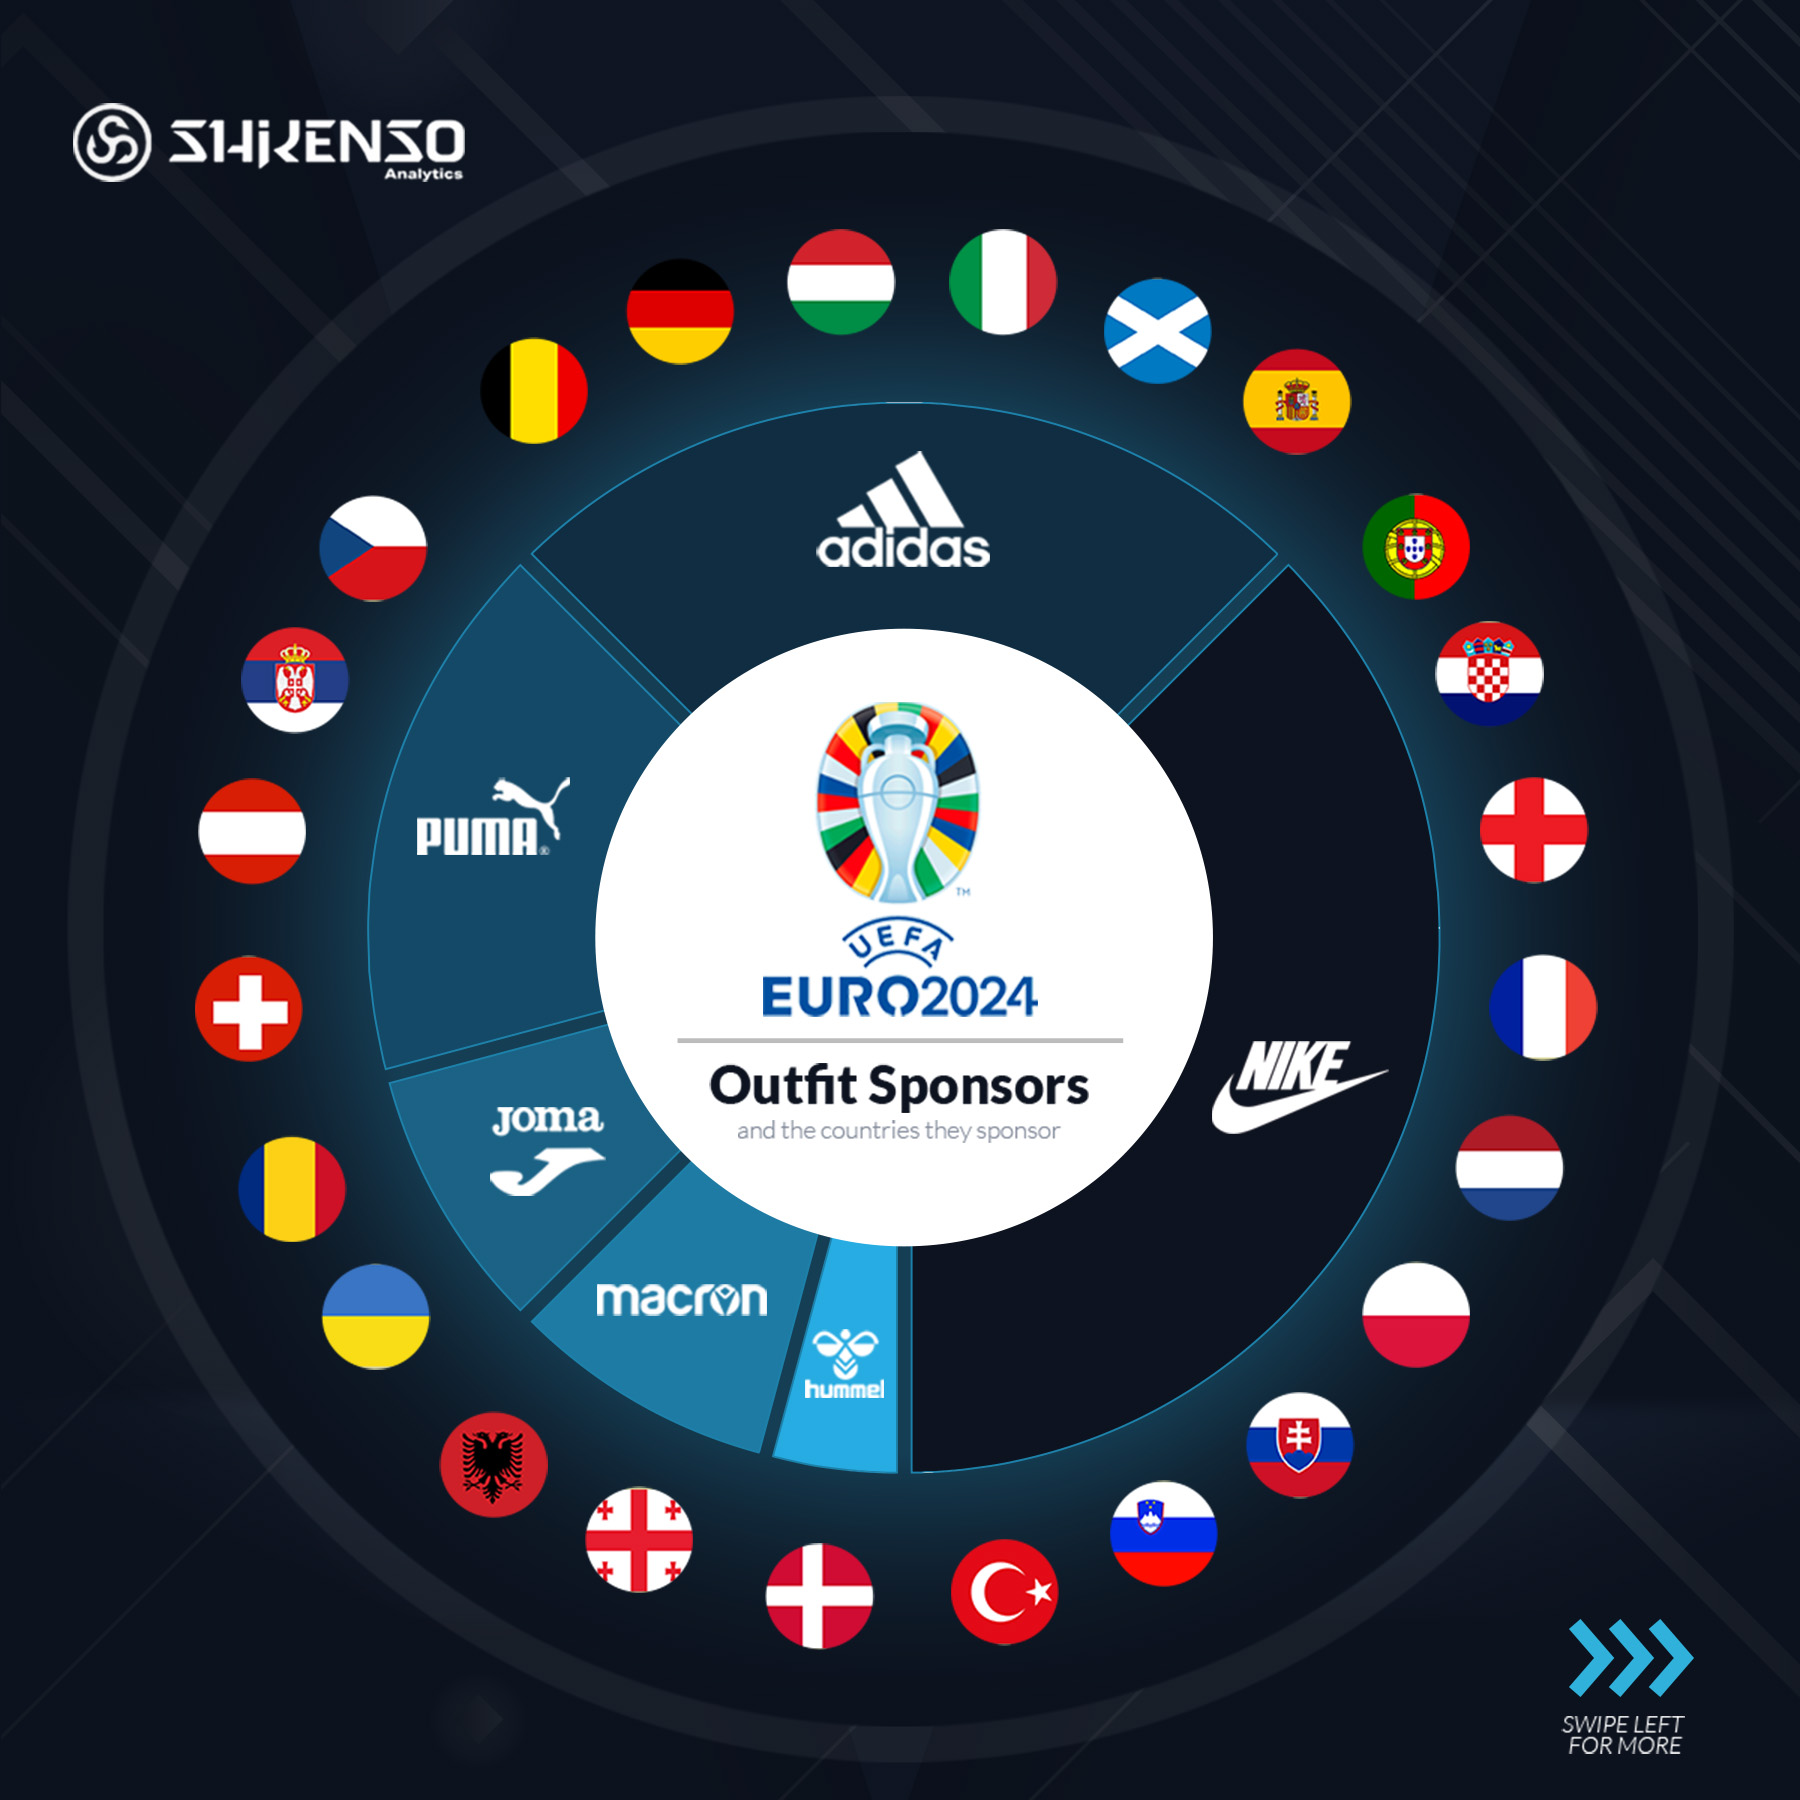 Overview graphic showing all outfitting sponsors for the national teams participating in EURO 2024, highlighting brands like Nike, Adidas, Puma, Joma, Macron, and Hummel.